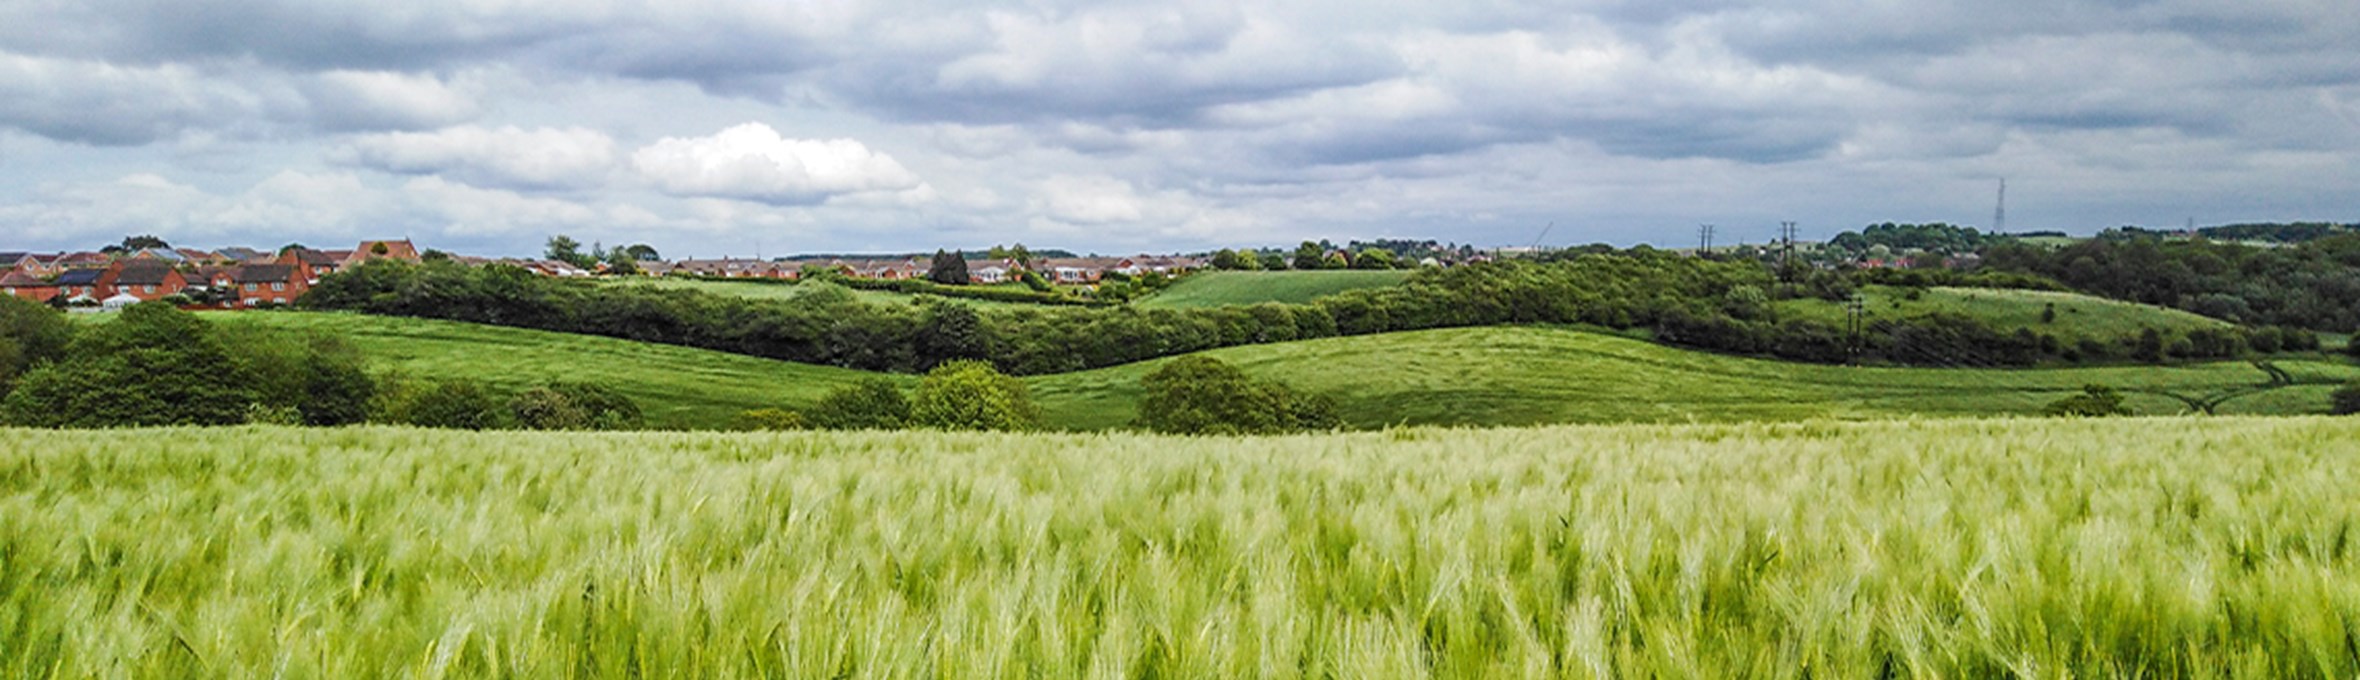 View across wheat field to village in distance under grey clouds